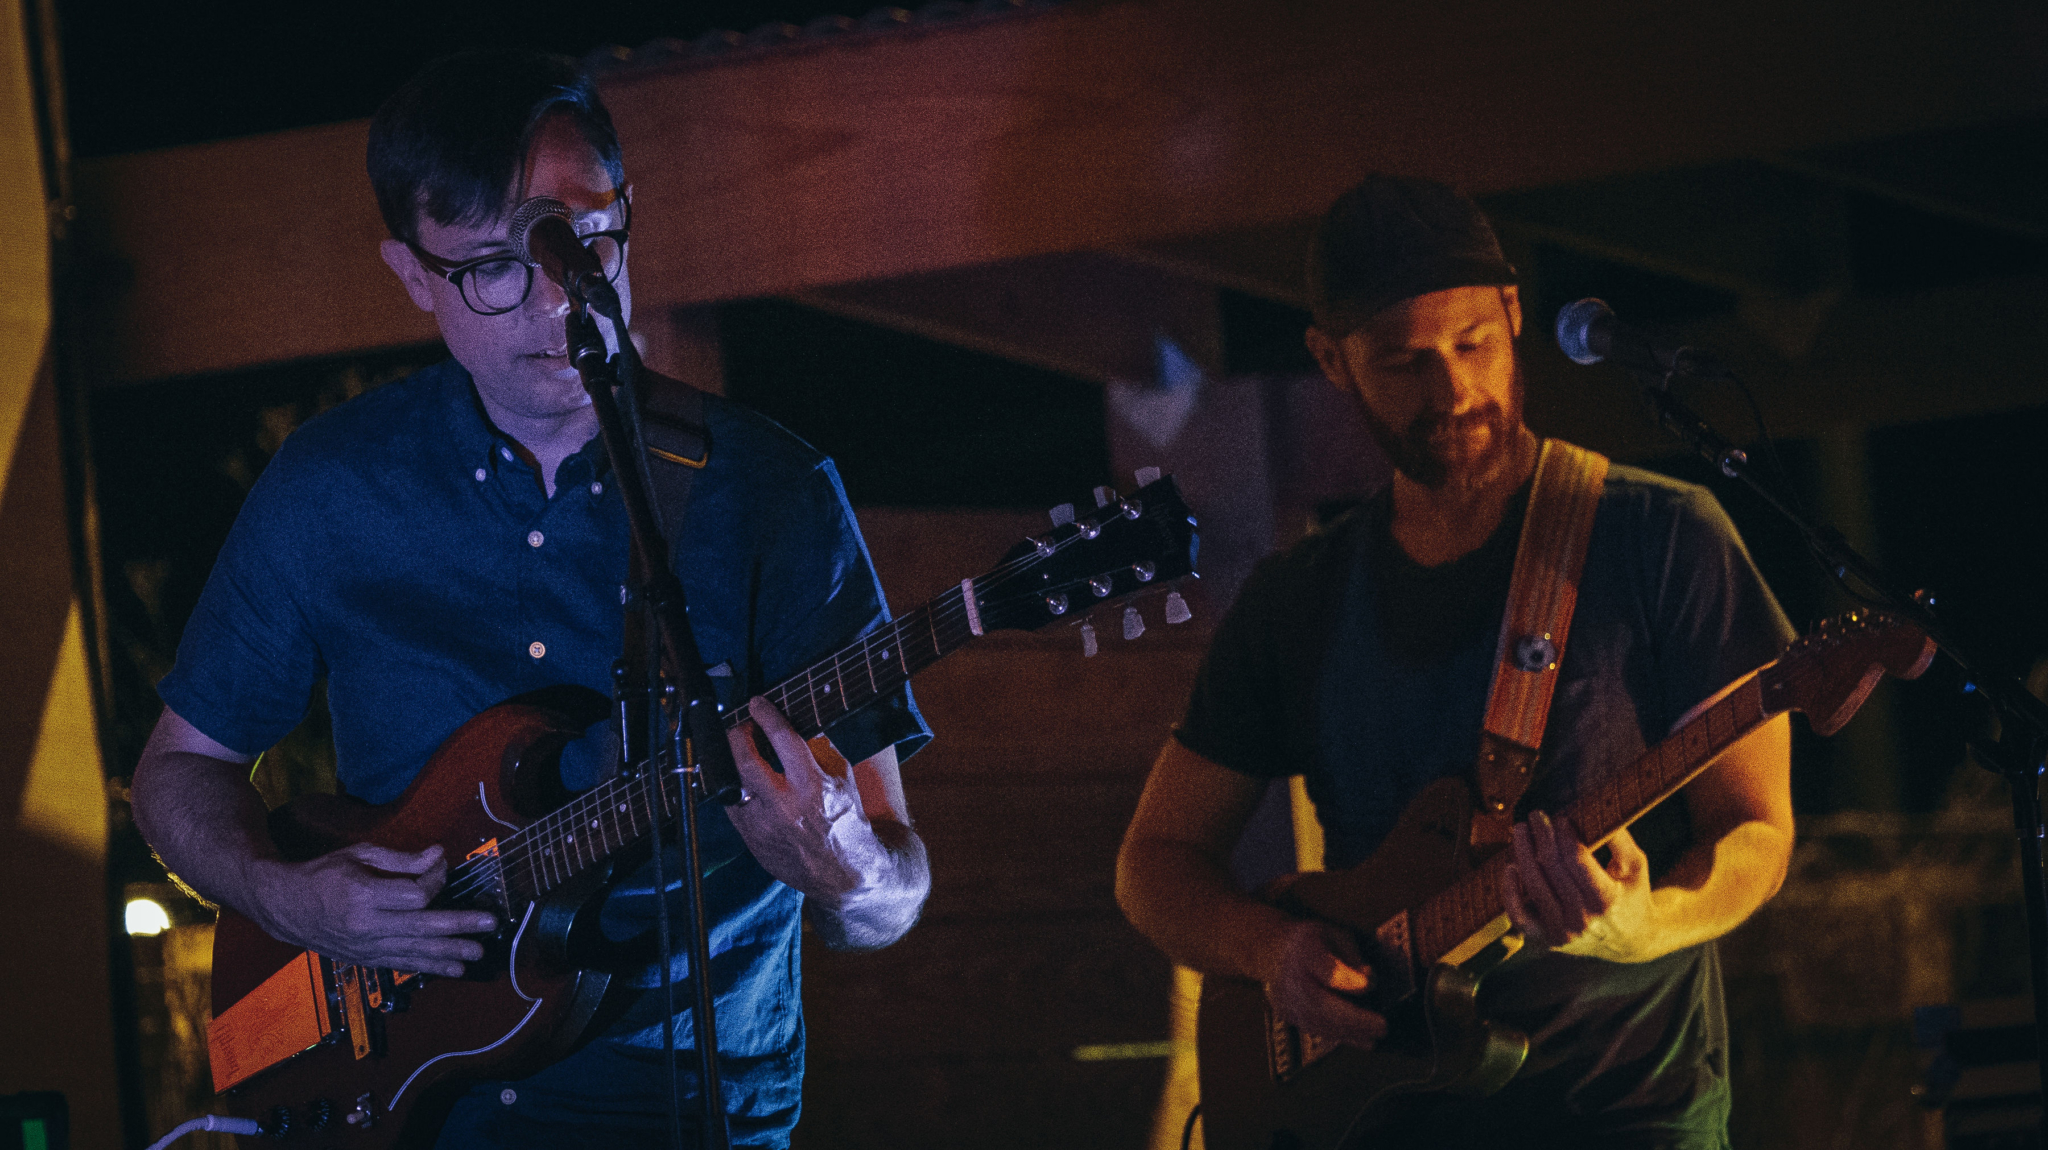 The Blips' Chris McCauley and Will Stewart perform at Ghost Train Brewing Company. Photo by Justin Shubert for Studio Moderne.